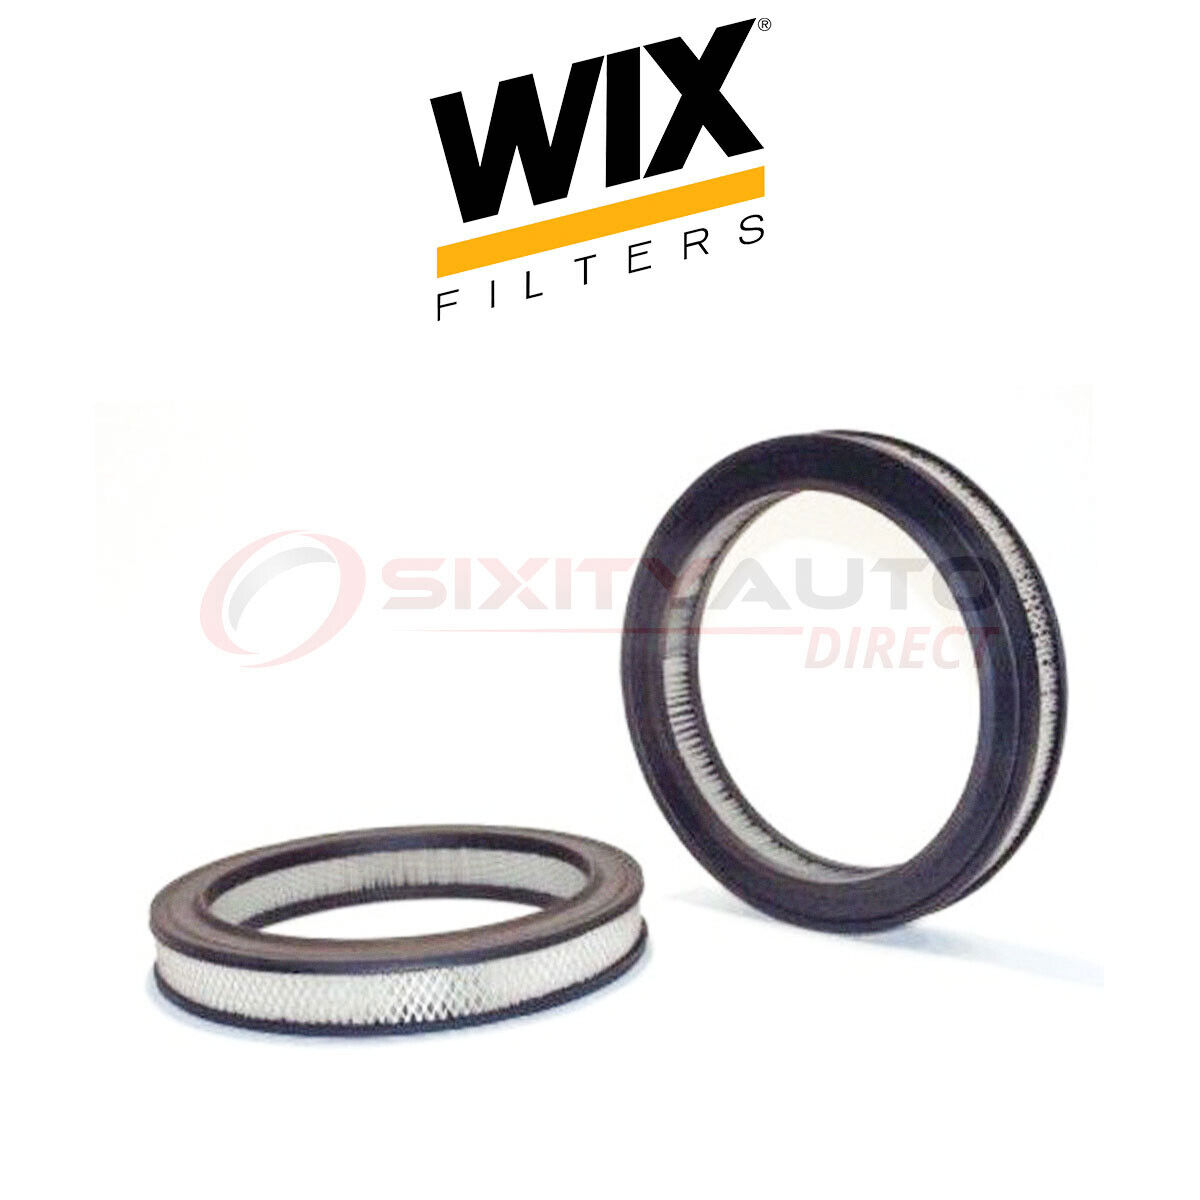 WIX Air Filter for 1977 Mercury Monarch 5.0L V8 - Filtration System to